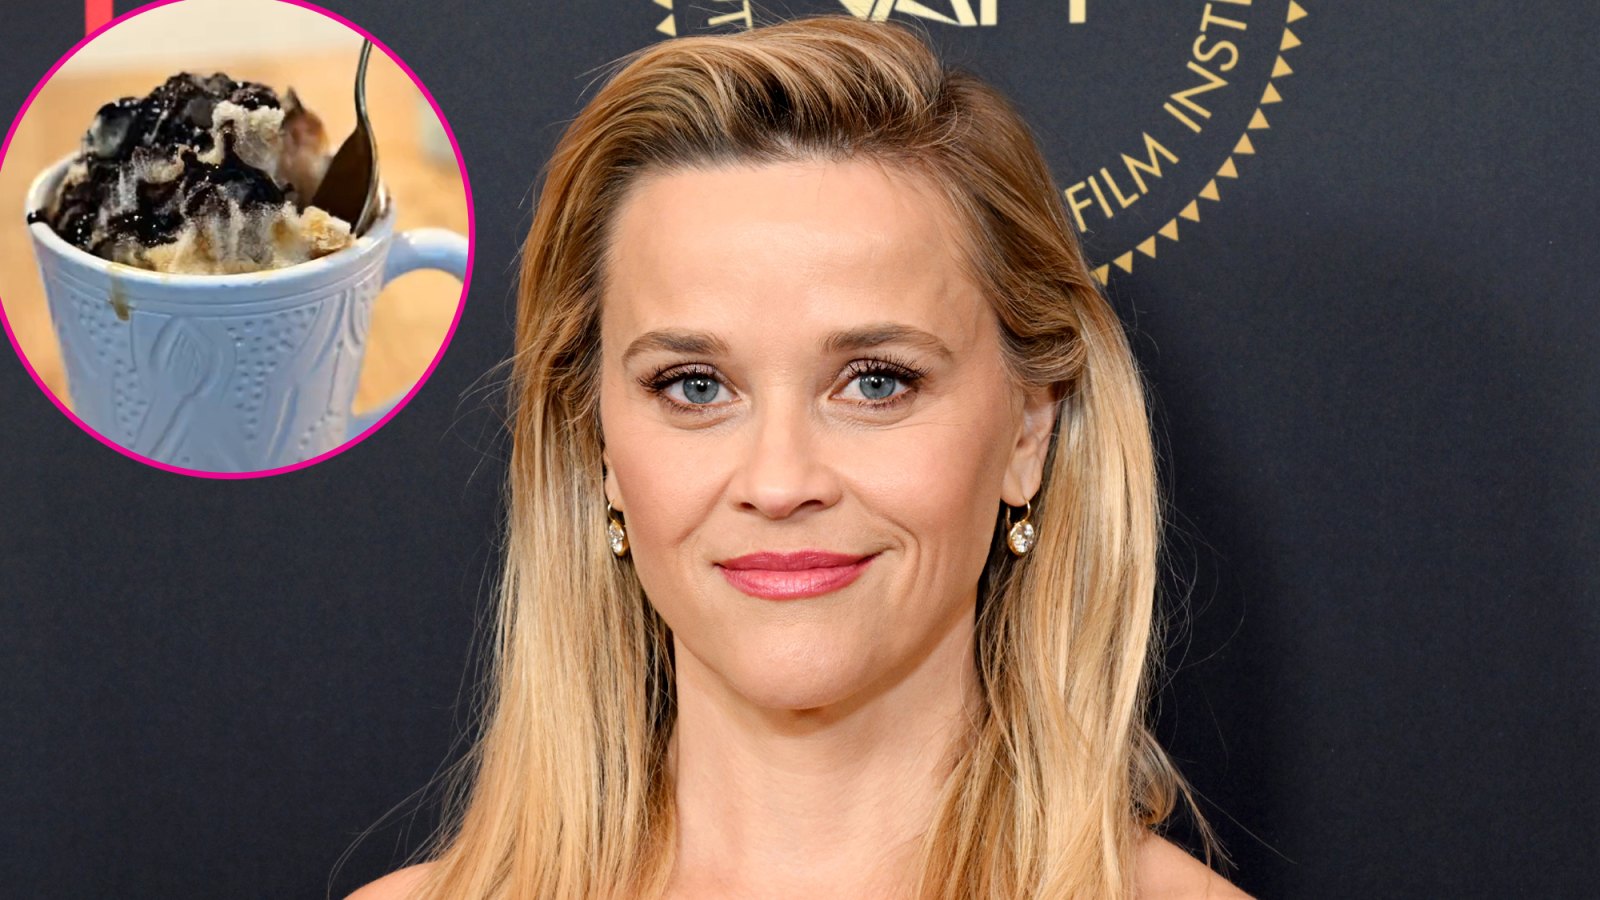 Reese Witherspoon Claps Back at Critics Disgusted With Her for Eating Snow: 'You Only Live Once'